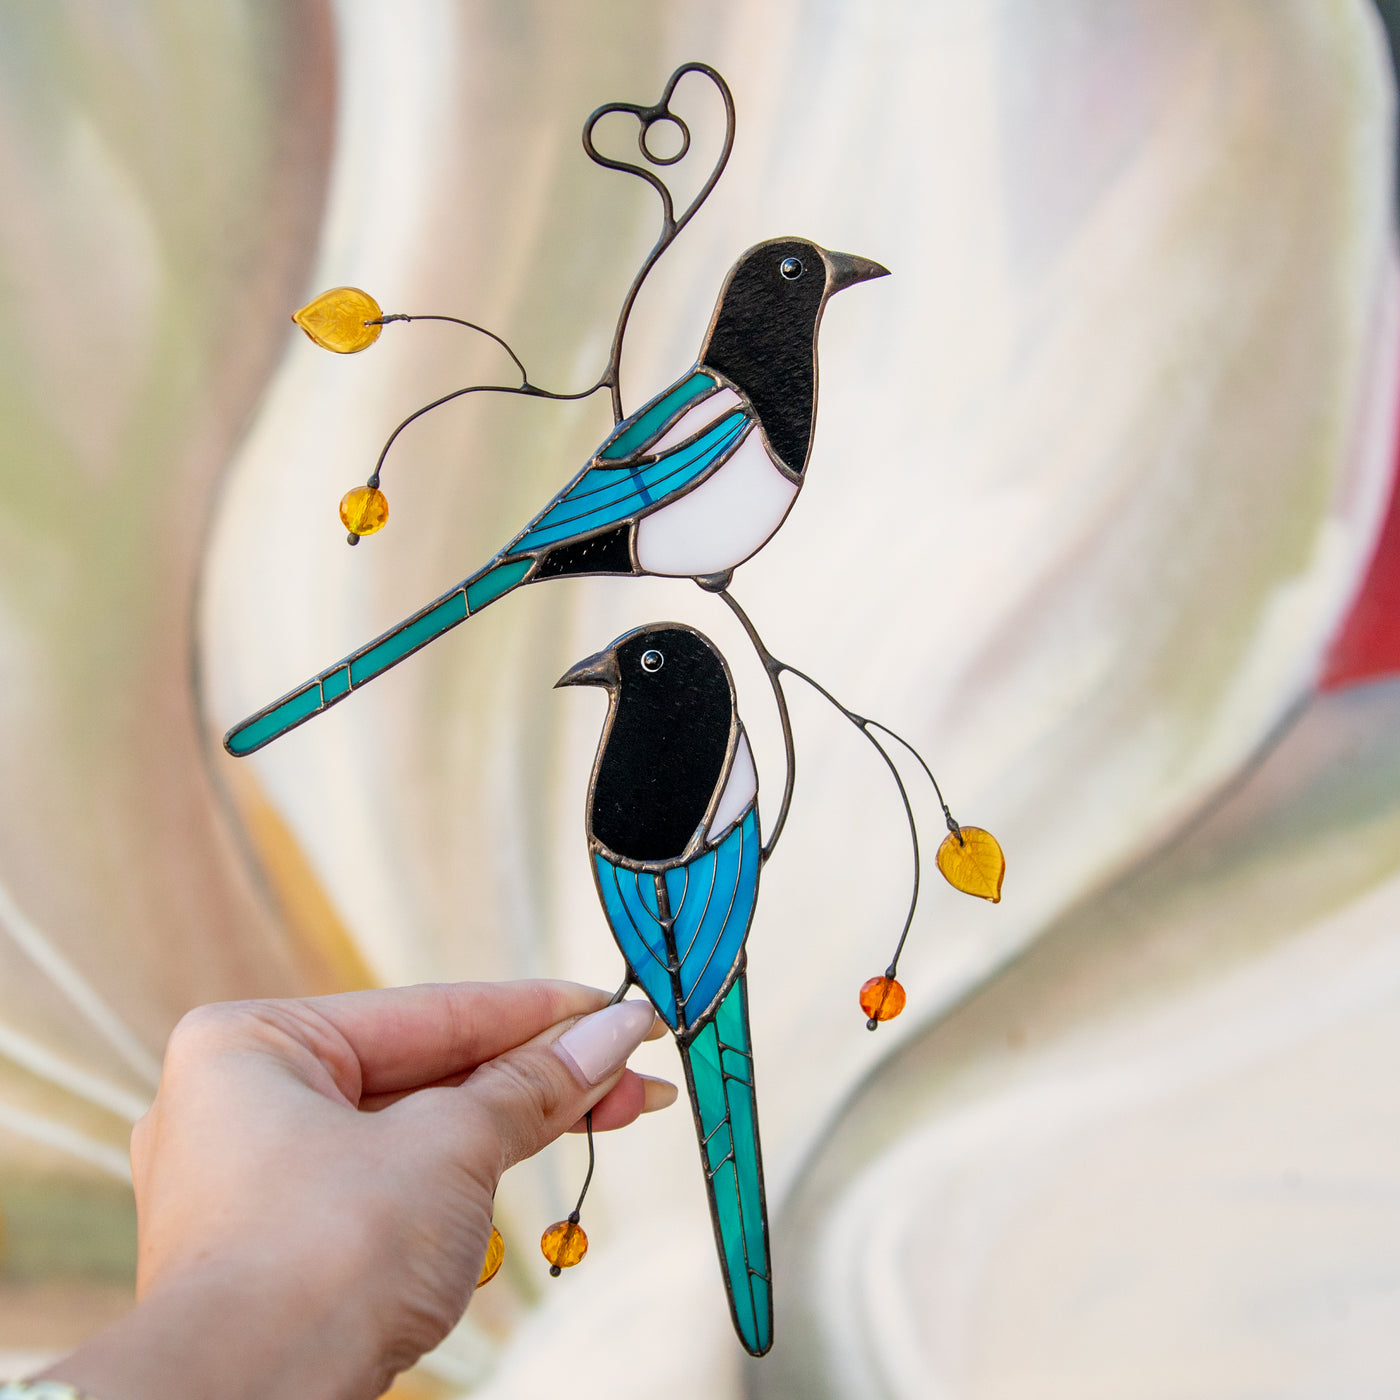 Stained glass suncatcher of two magpies sitting on the branch with leaves and berries